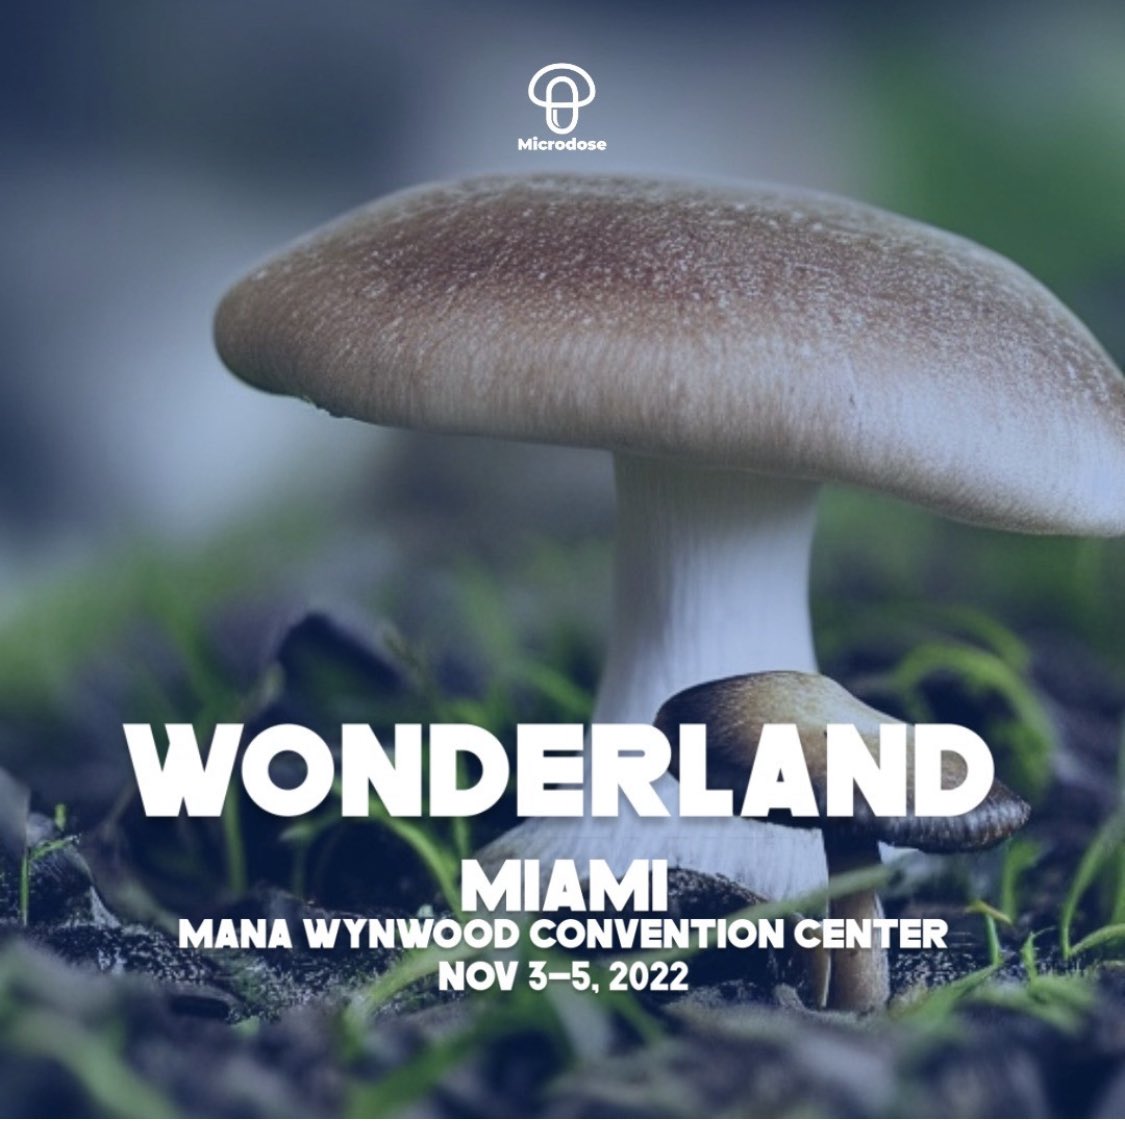 I’ll be at #WonderlandMiami with @MicrodoseHQ next week! Excited to play some music and share on psychedelics from an artist’s perspective ✨🍄